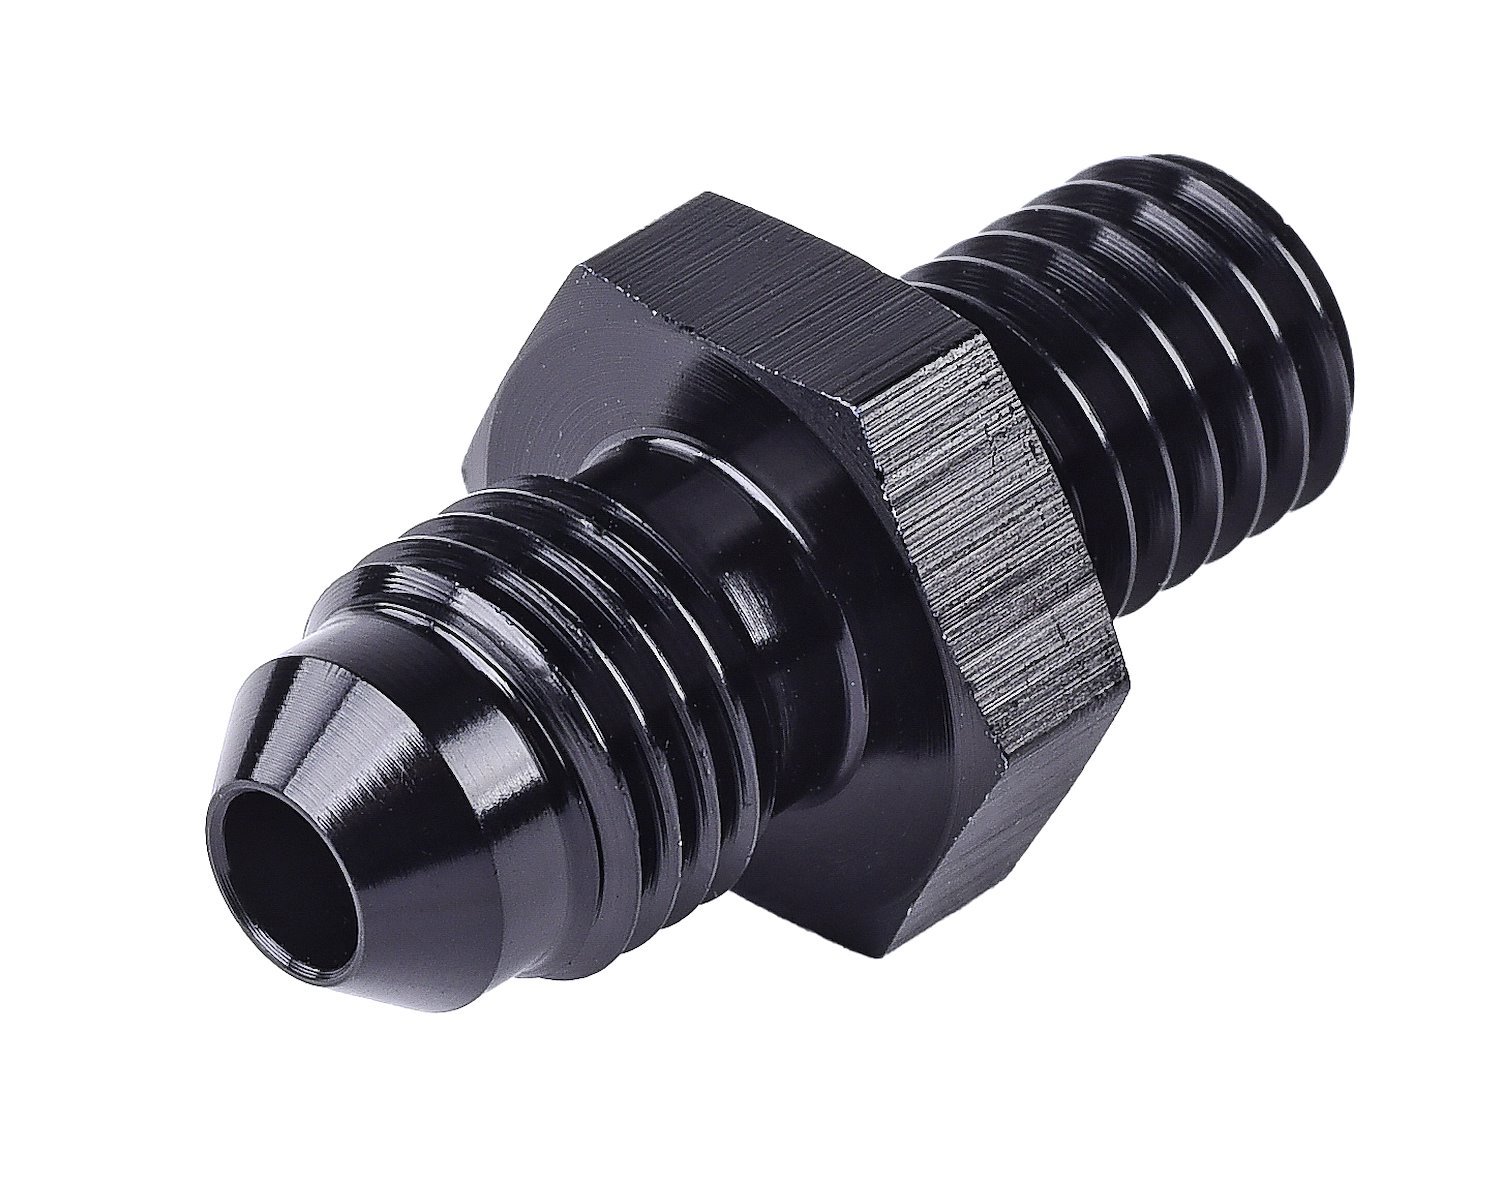 AN to Metric Adapter Fitting [-4 AN Male to 10mm x 1.0 Male, Black]